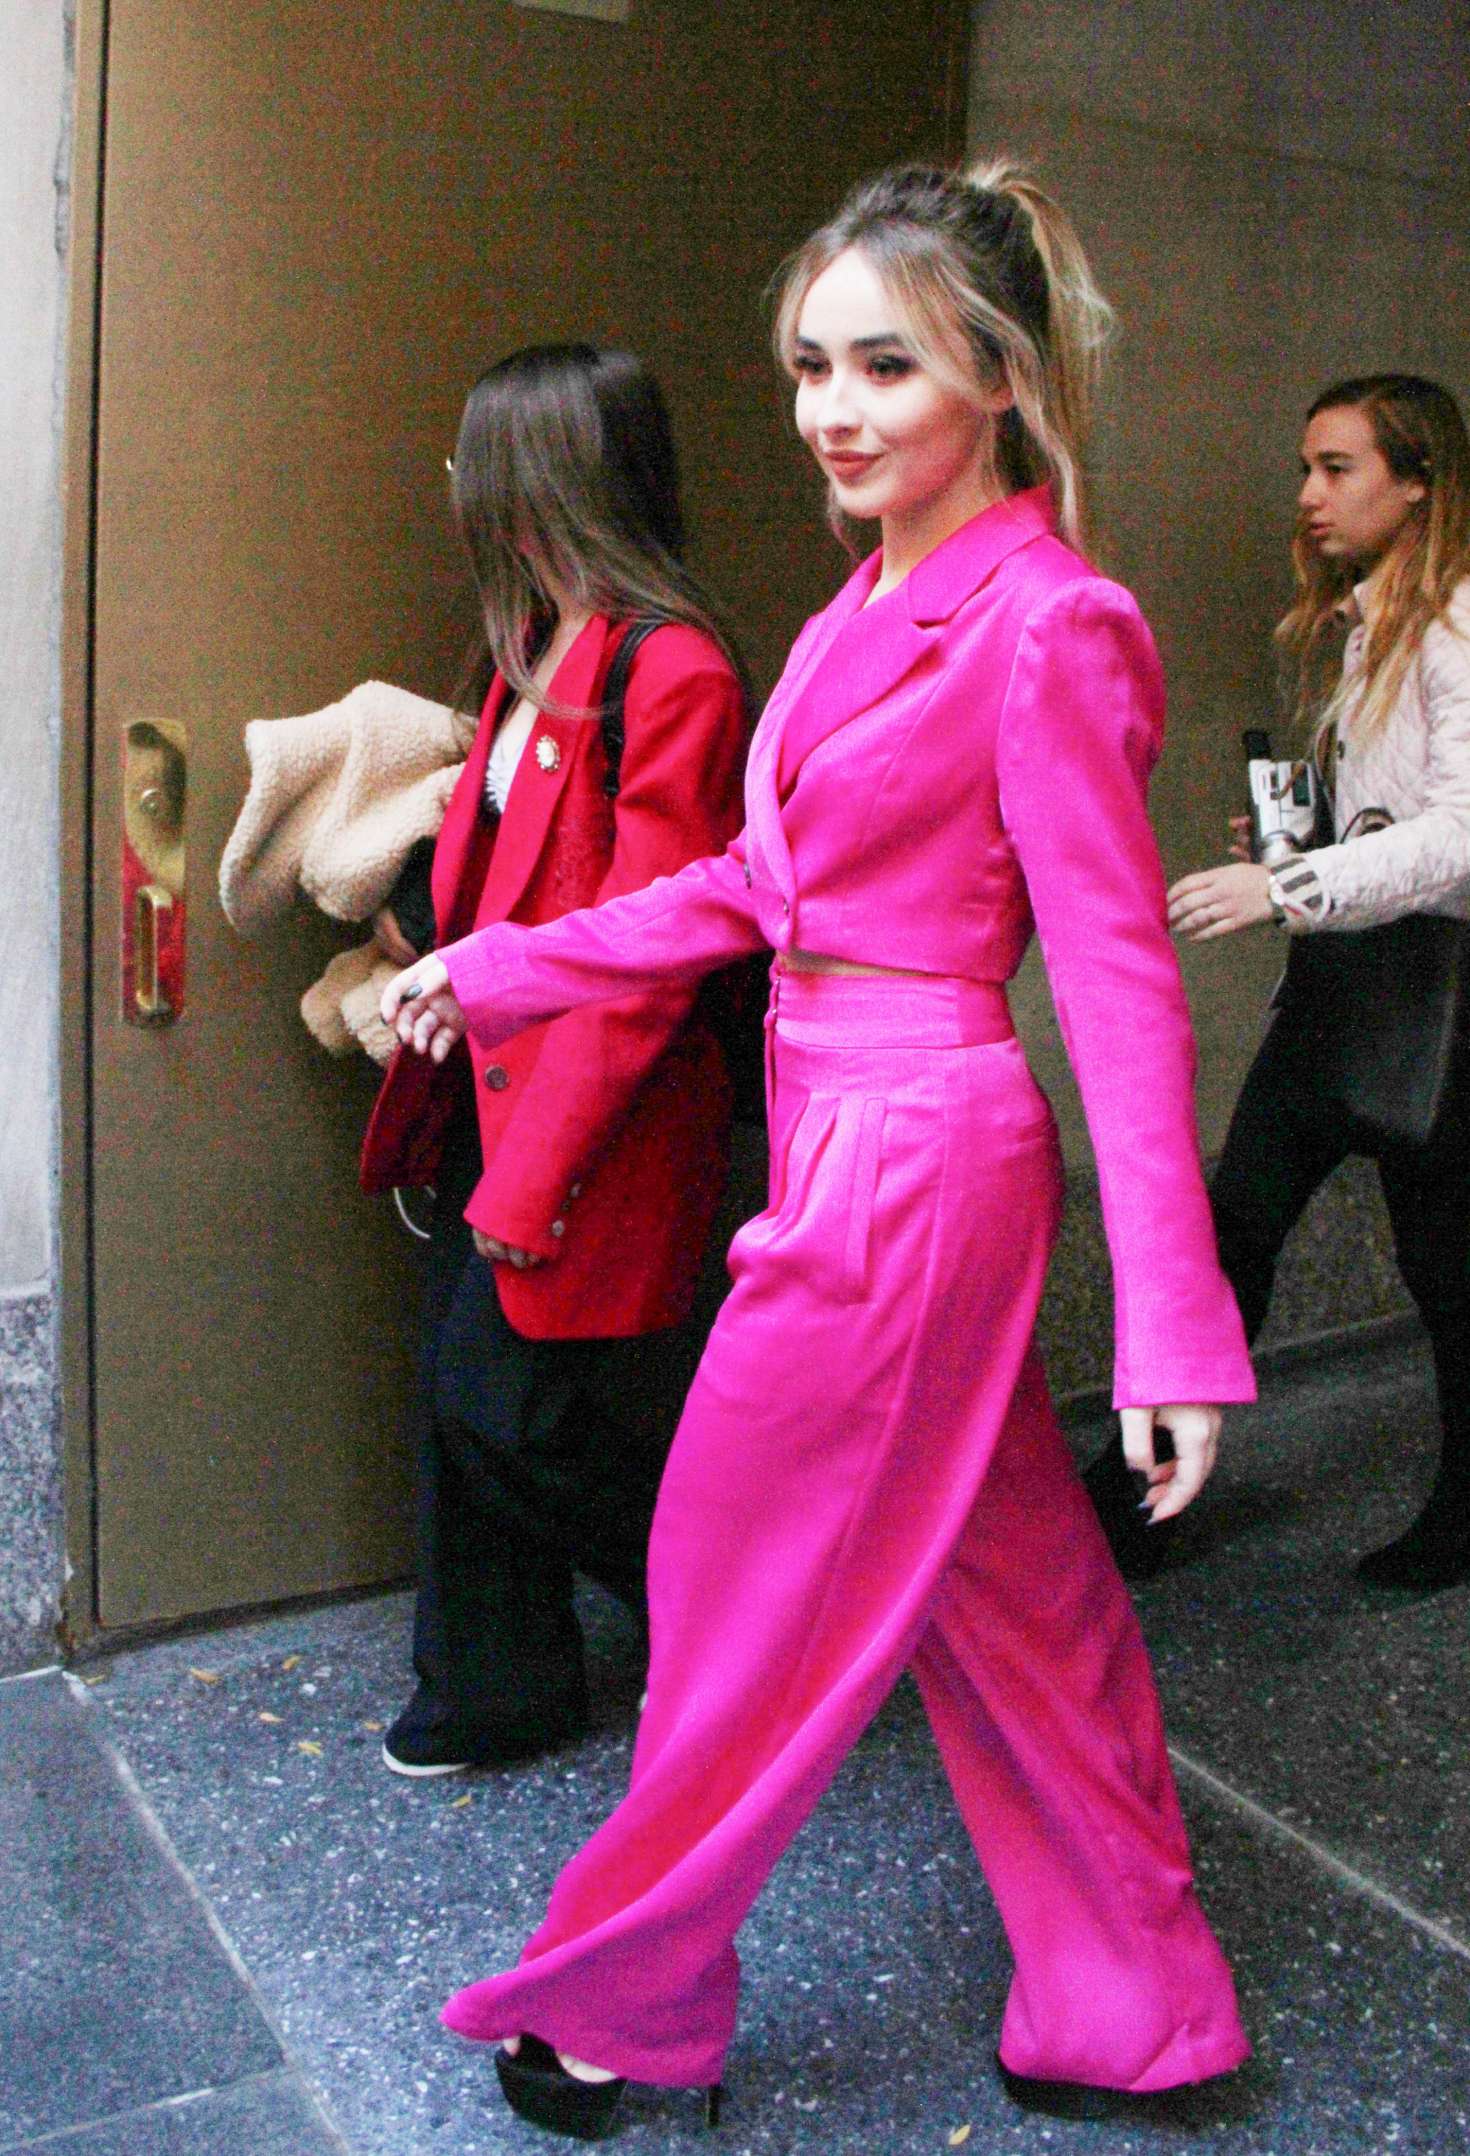 Sabrina Carpenter in Pink: Visiting the Today show.